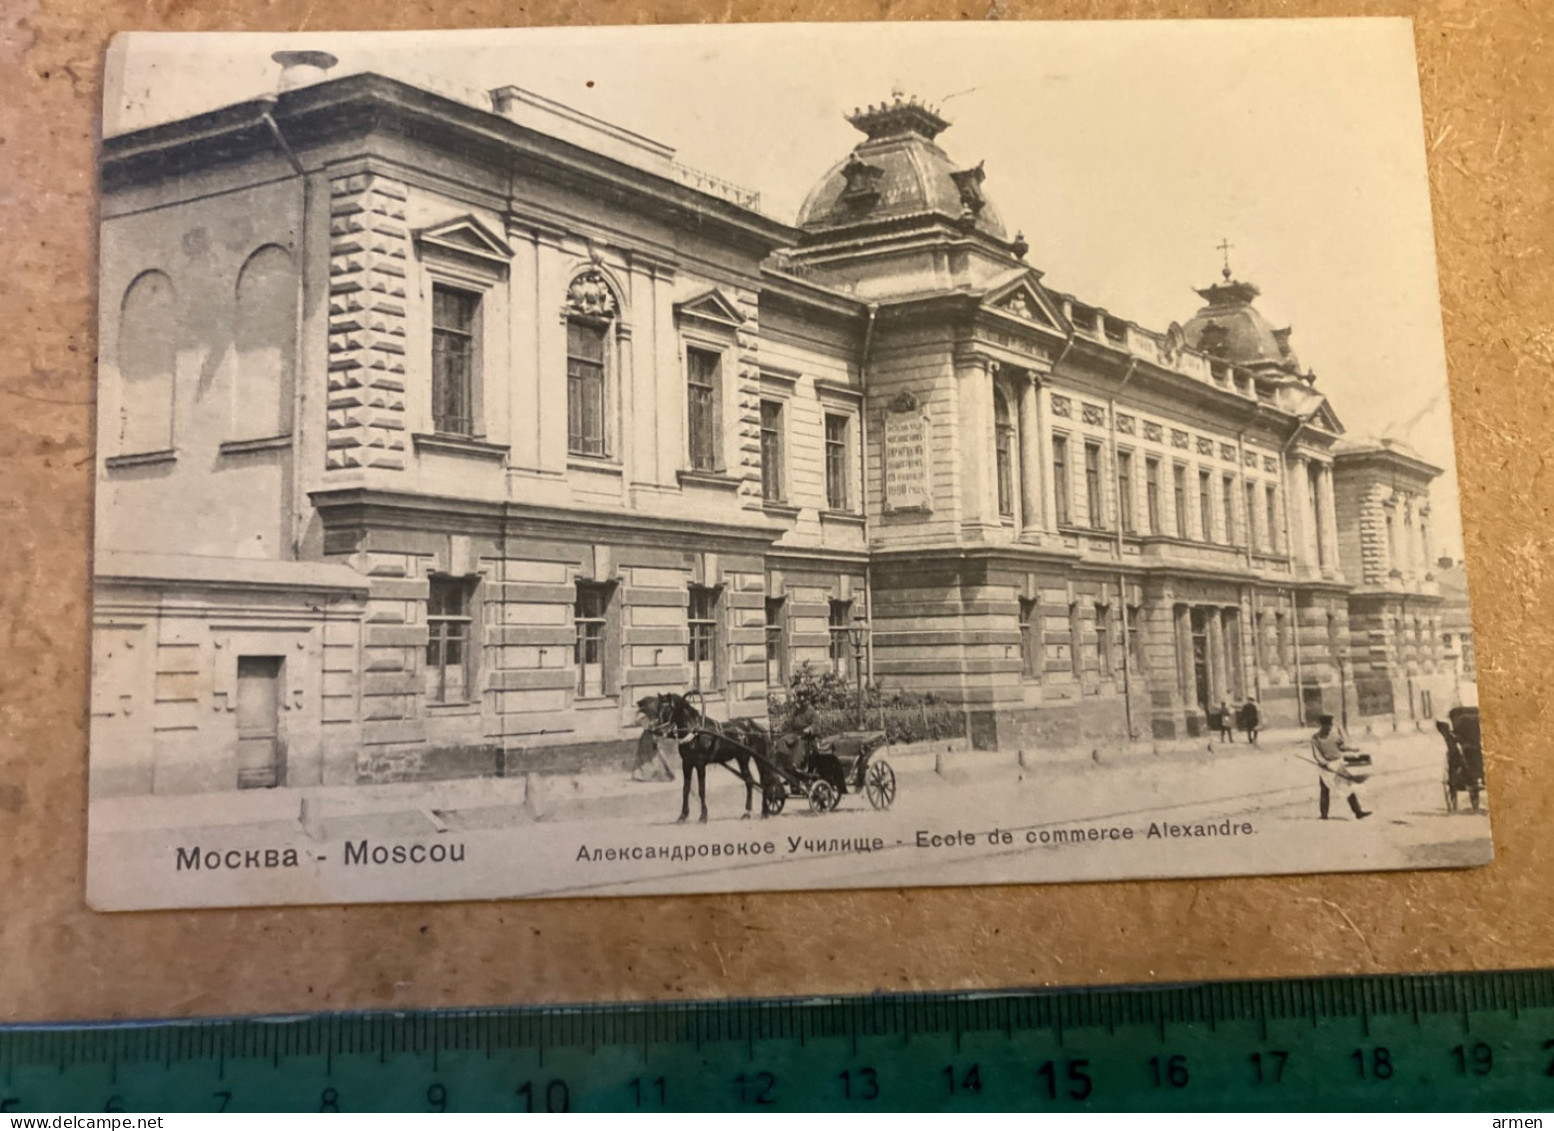 Cpa Russie Russia Moscou Moskba Moscow - École De Commerce Alexandre 1911 - Russie